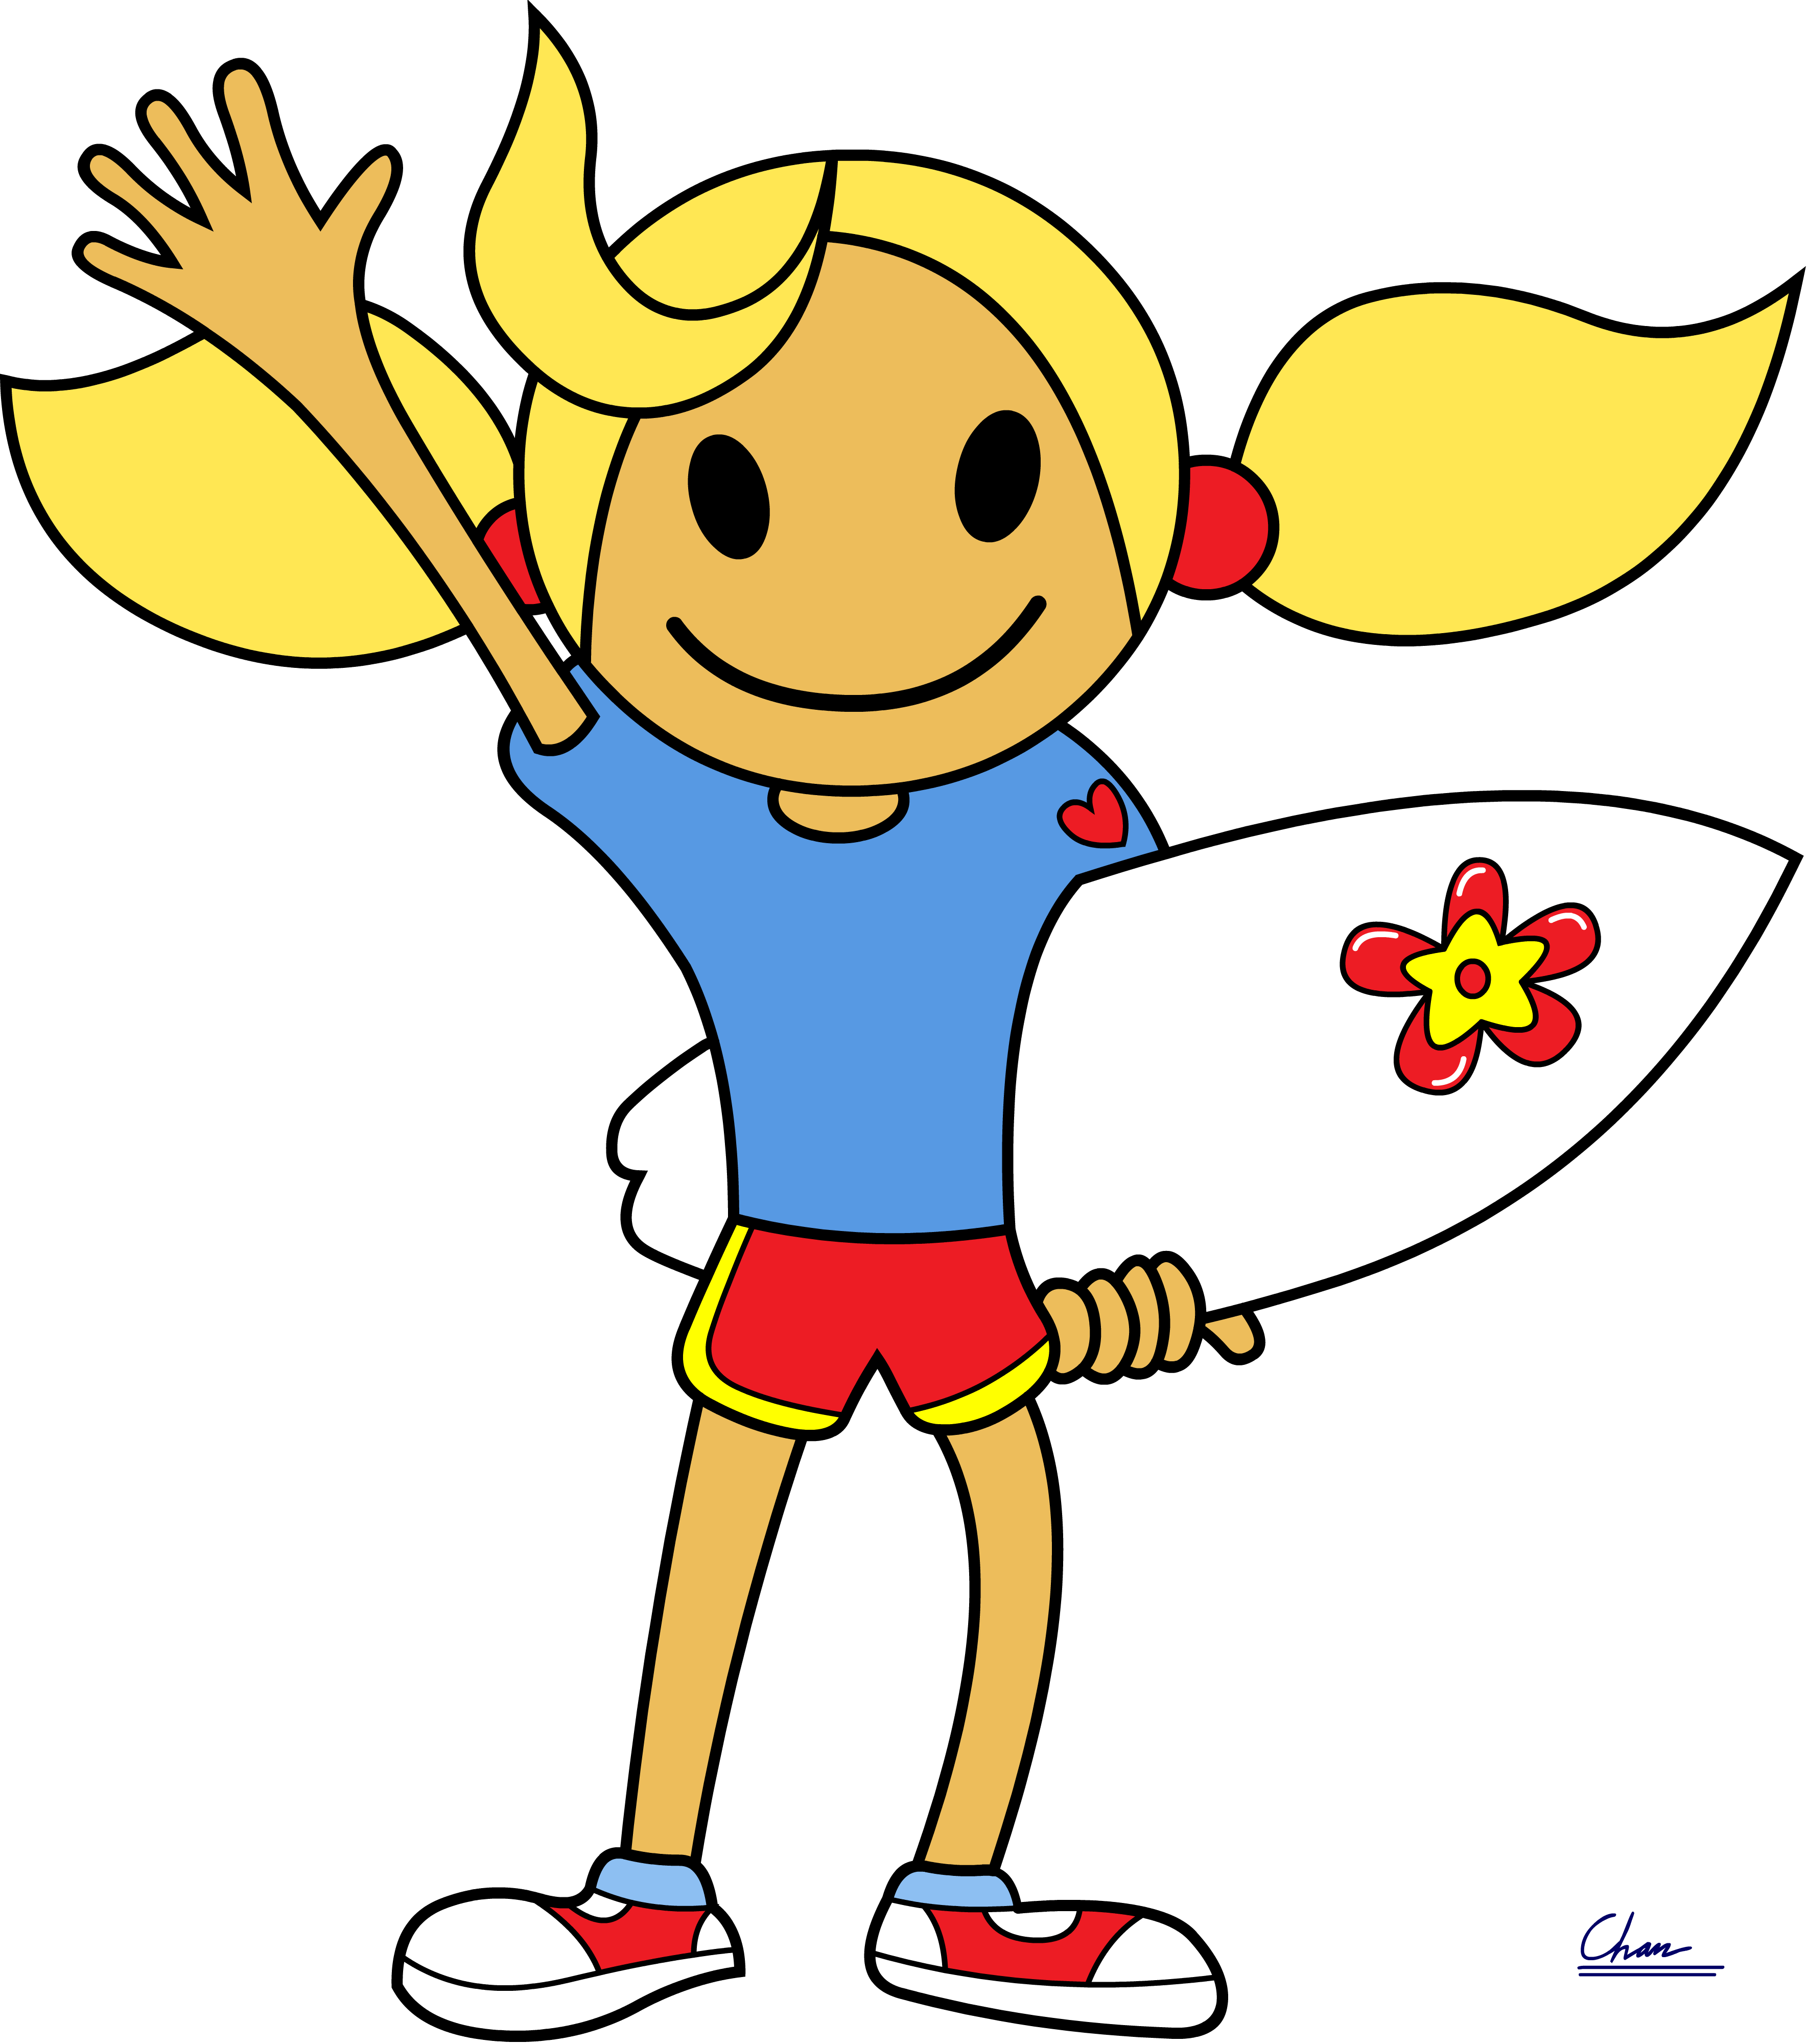 Surfer Girl From Summerland By Digbio - Surfer Girl Png (3539x4000)